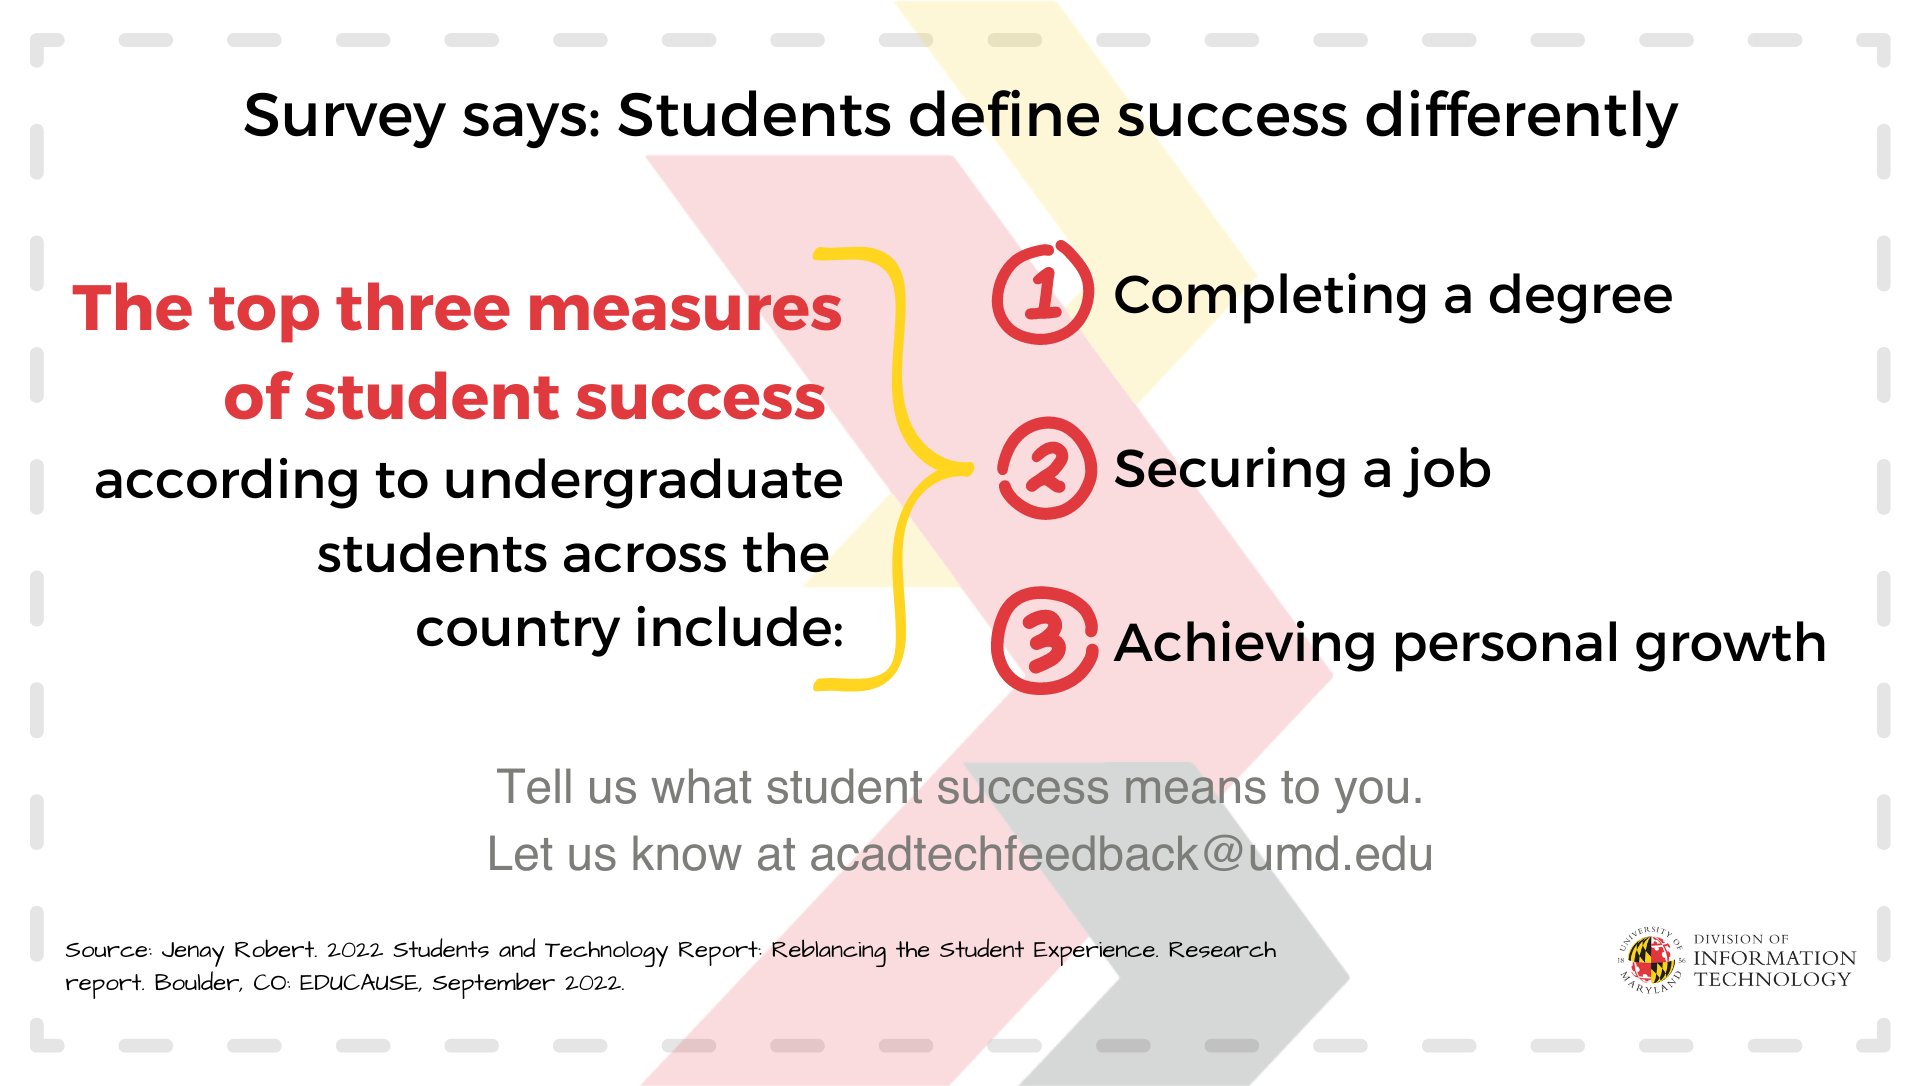 Survey says: Students define success differently. The top three measures of student success according to undergraduate students across the country include: 1) completing a degree, 2) securing a job, 3) achieving personal growth. Tell us what student success means to you. Let us know at acadtechfeedback@umd.edu